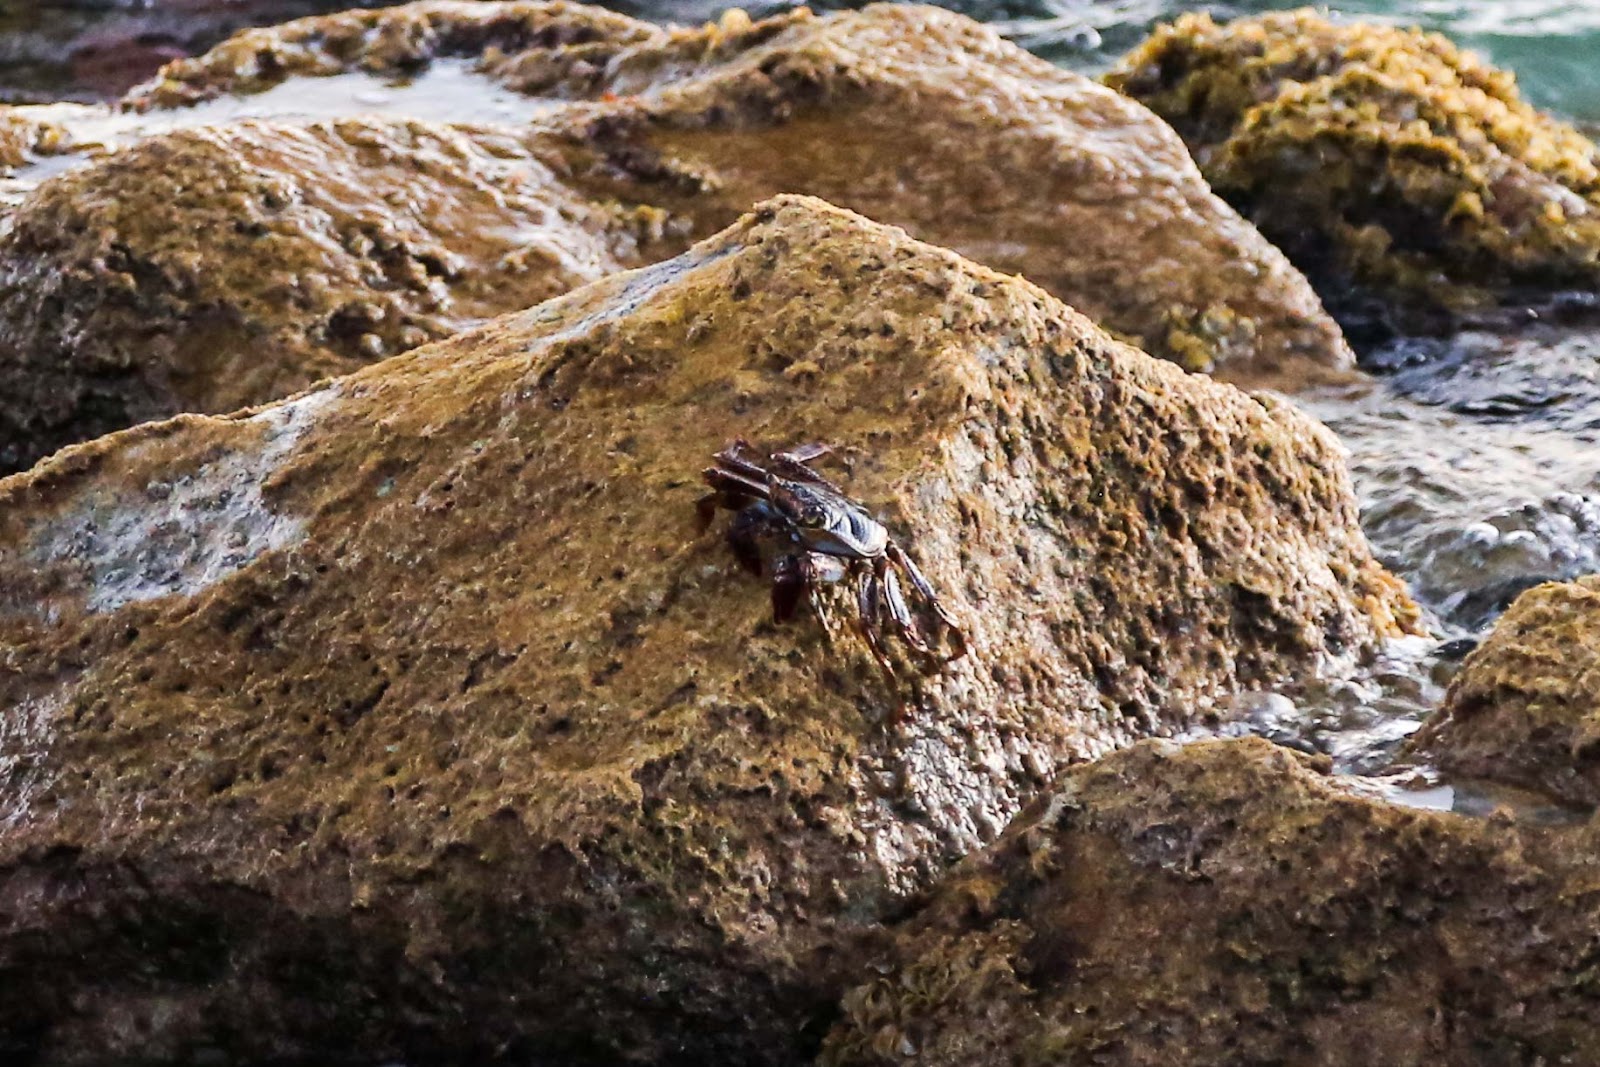 A cool dark red-brown crab on rocks at Zachary Taylor State Park in Key West.